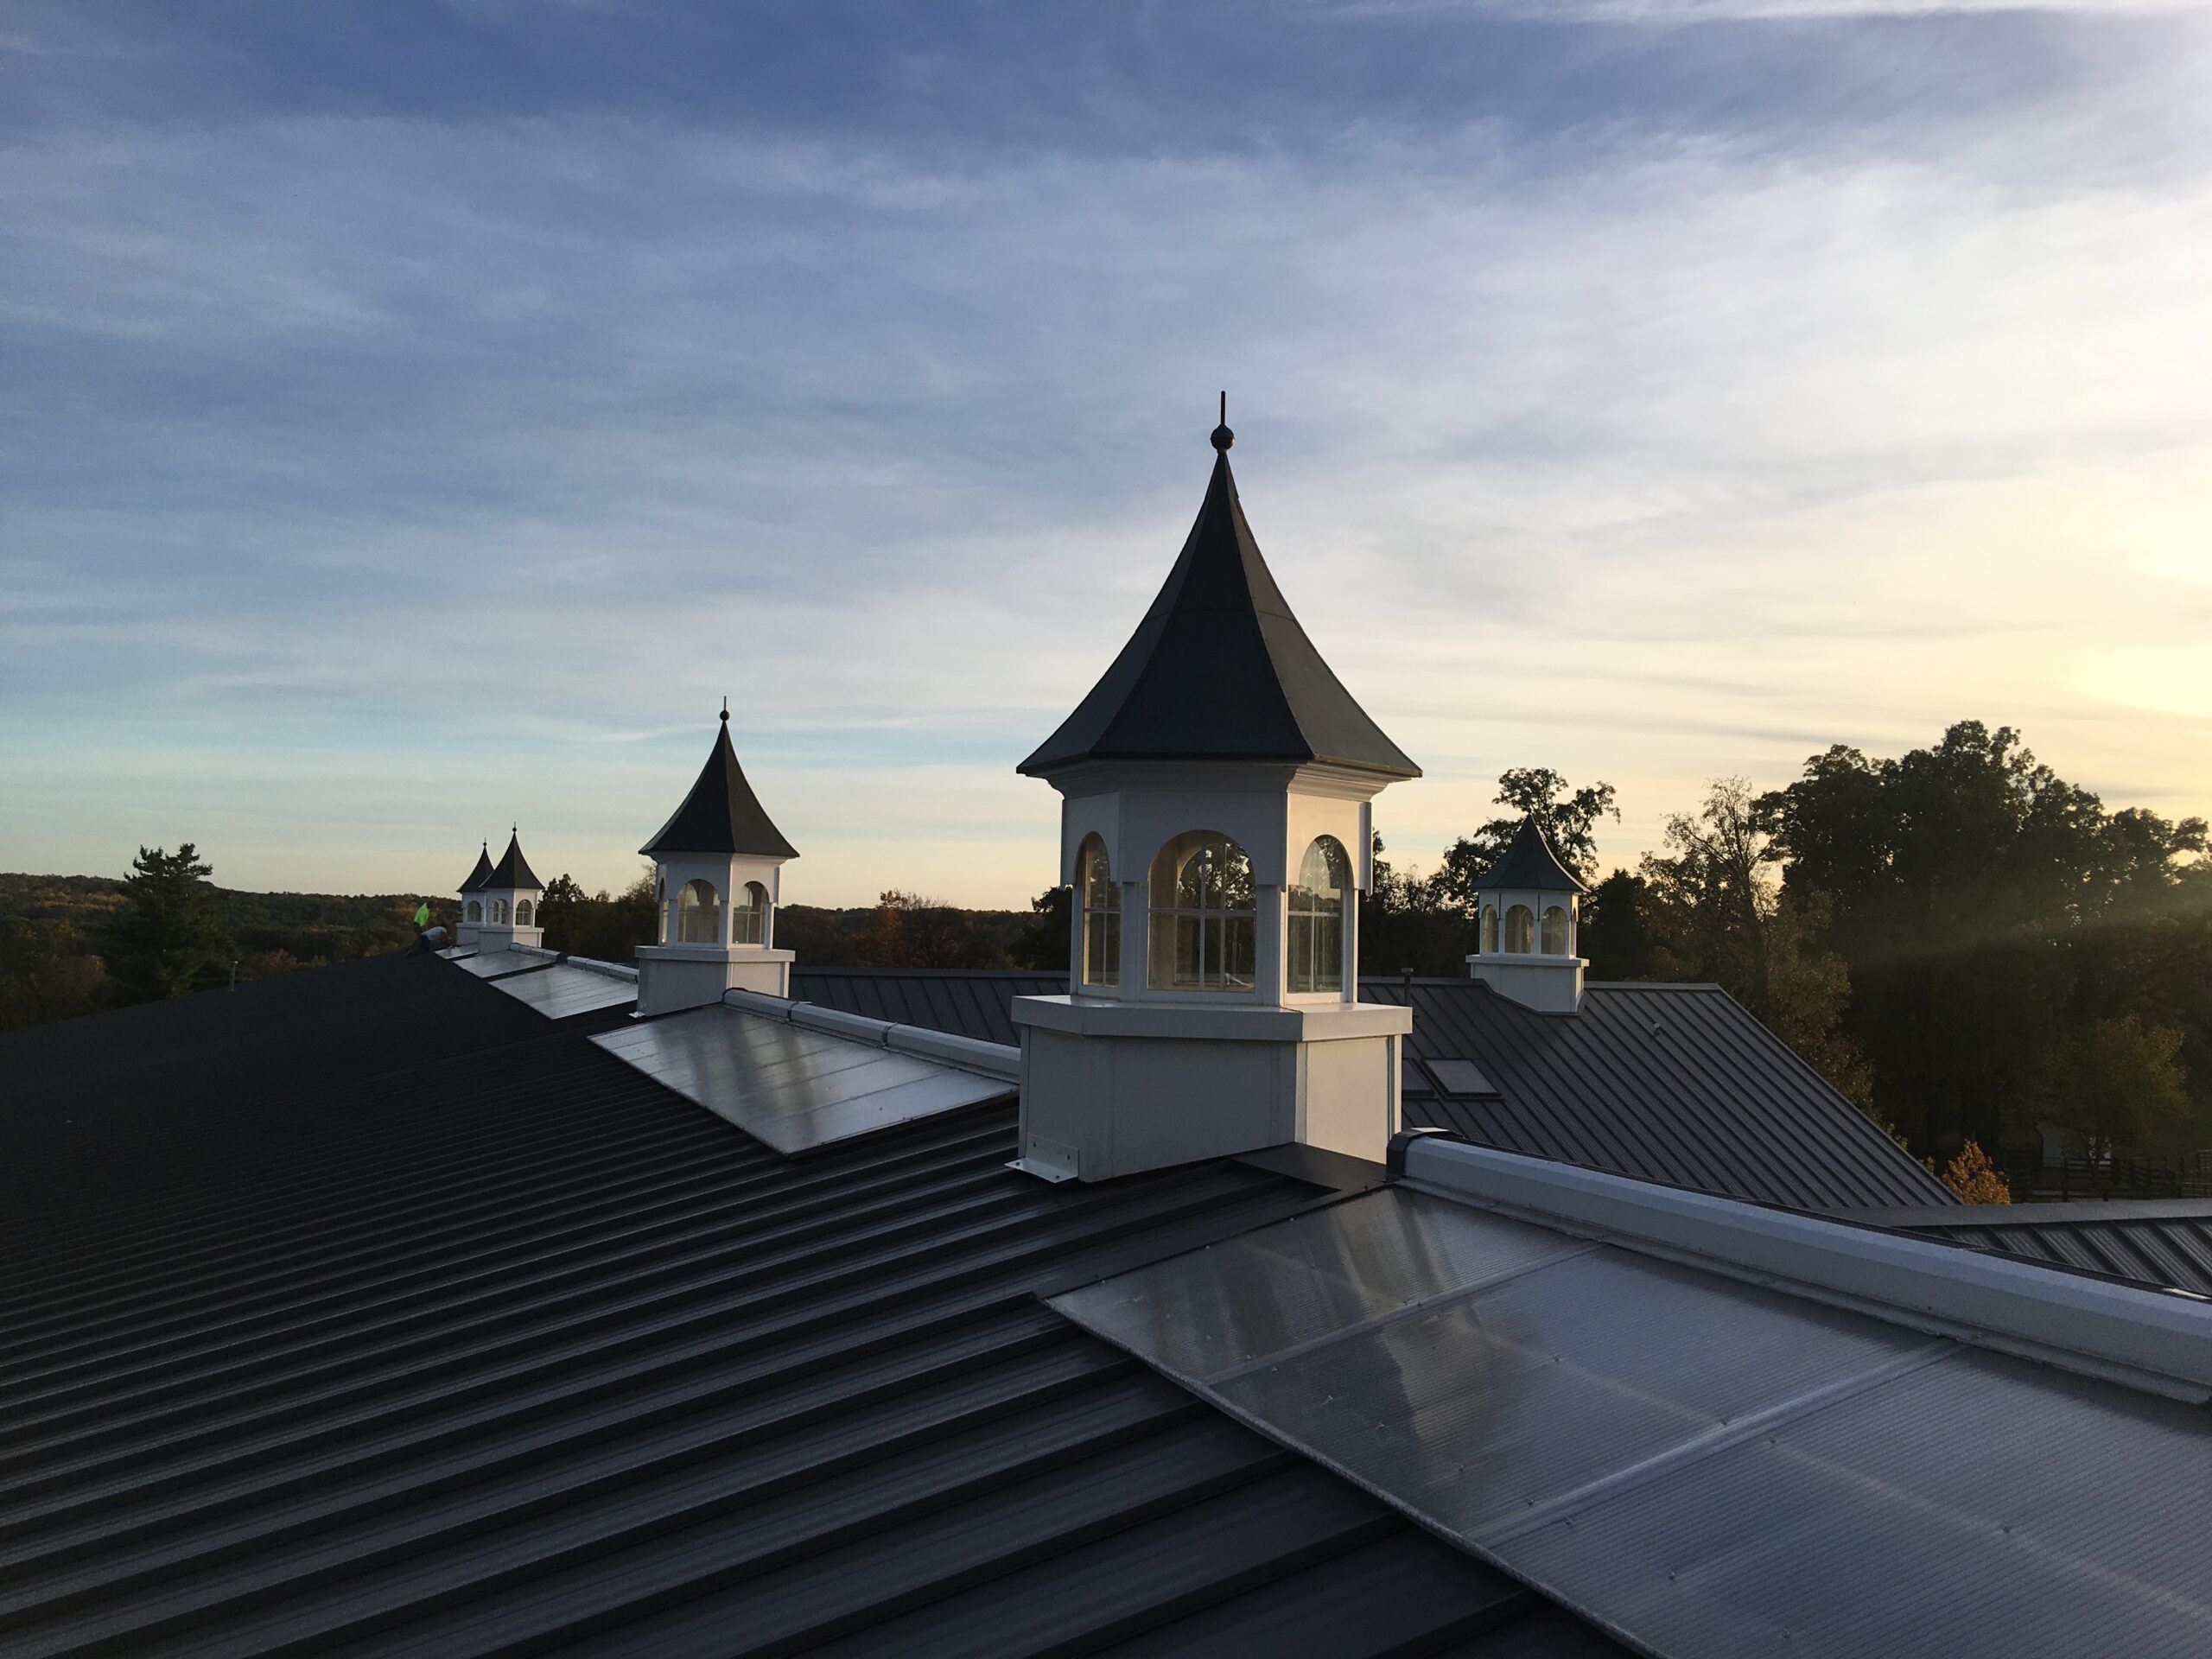 Musket Gray Standing Seam Metal Roof. Copper Cupolas. Standing Seam. Roofing. Metal Roofing. Northern Michigan Roofing.
